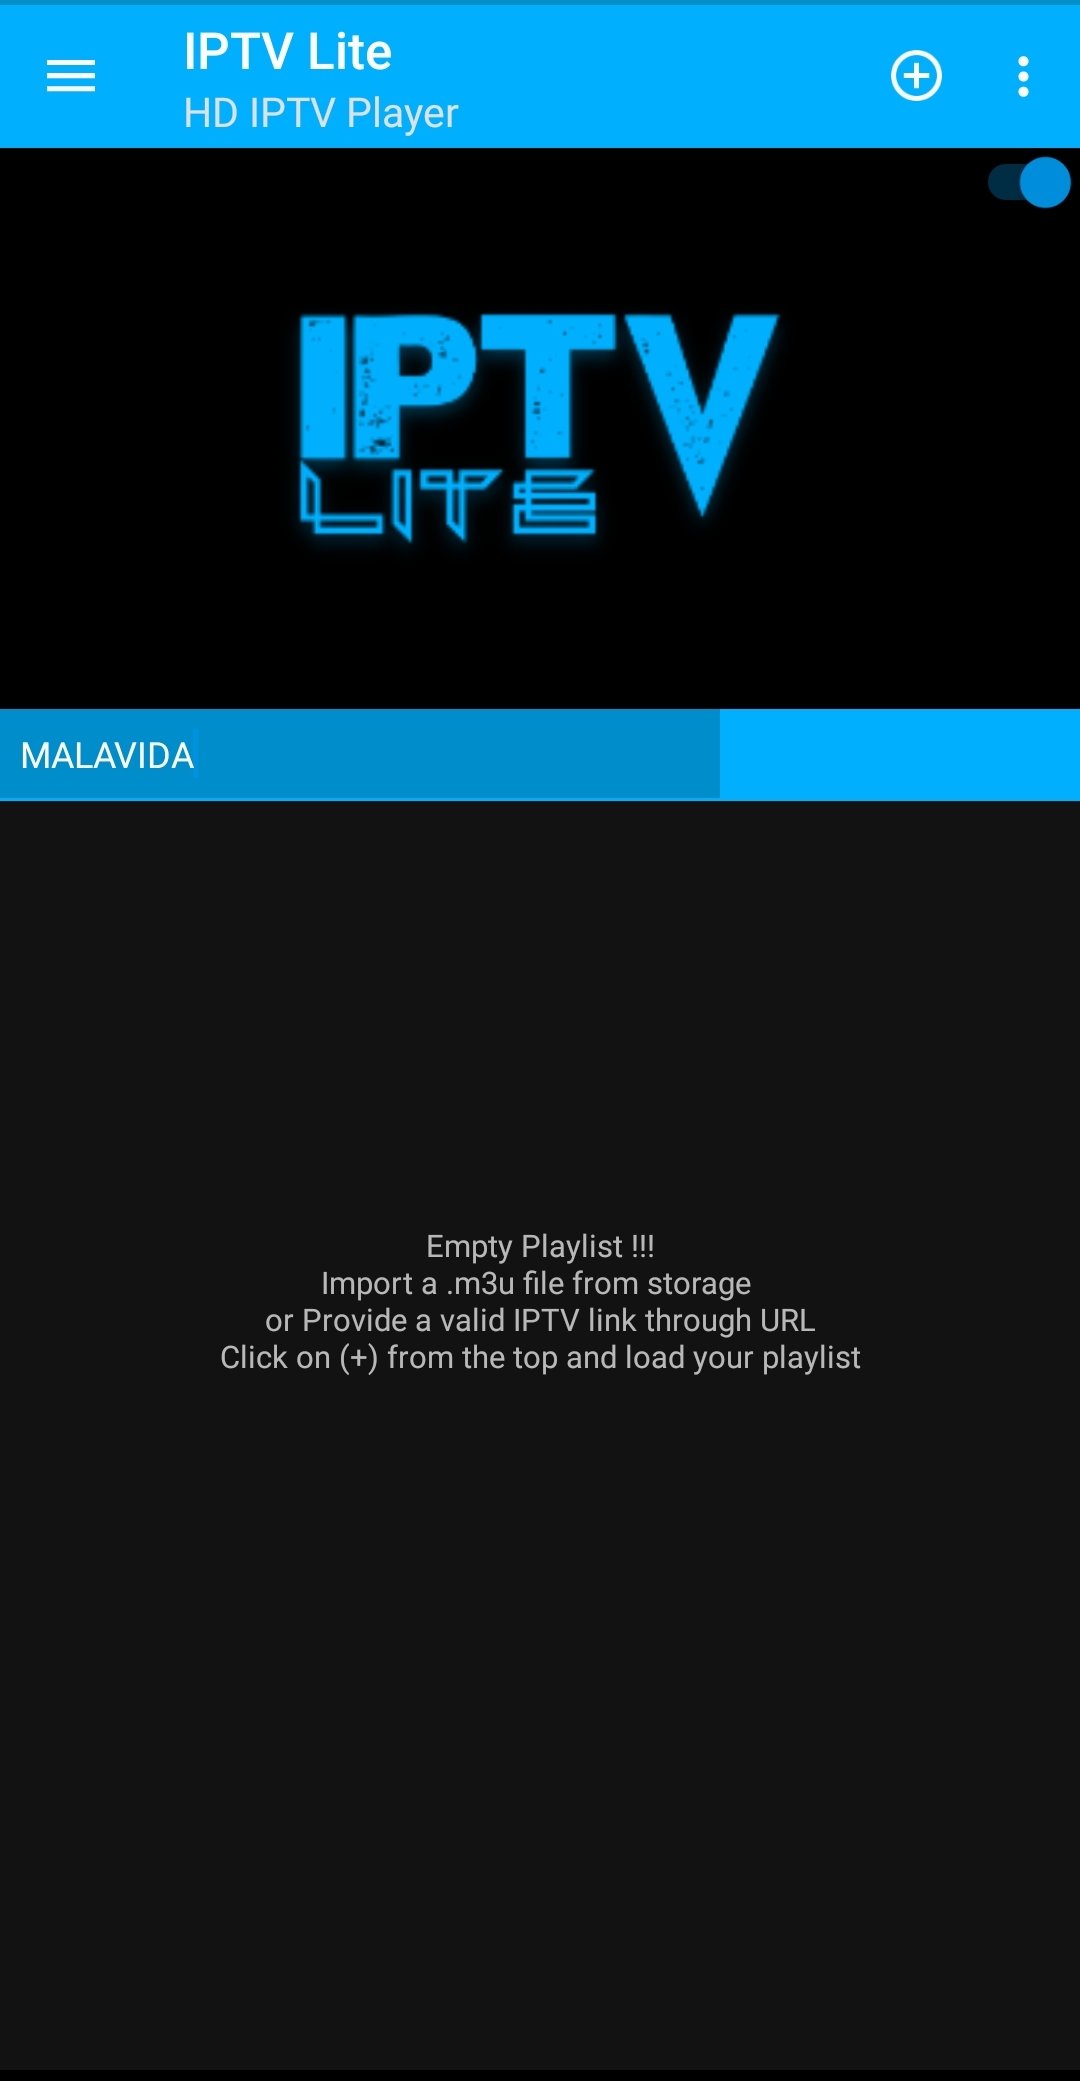 download m3u file for android